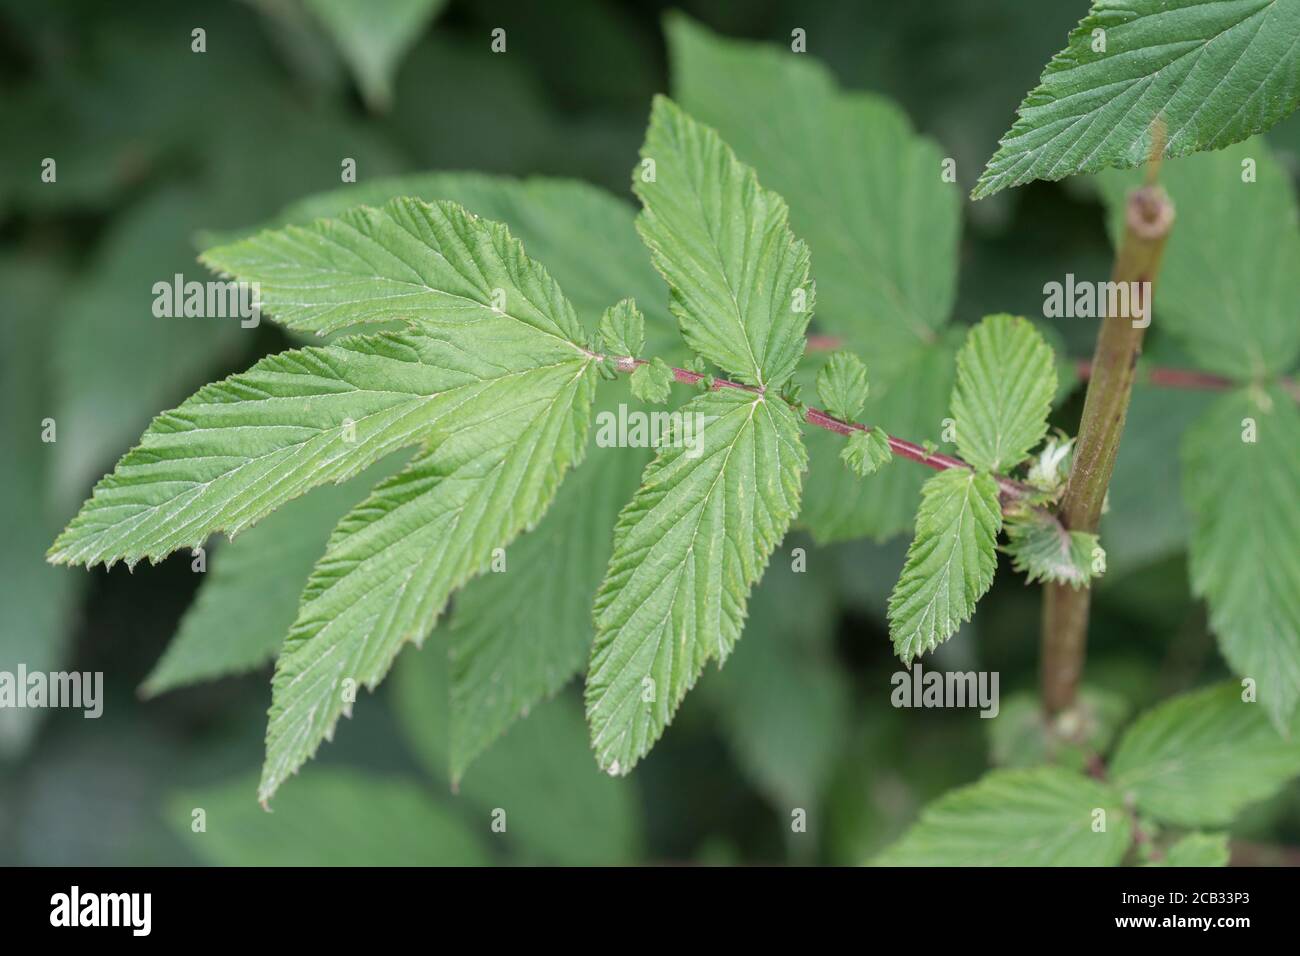 Meadowsweet / Filipendula ulmaria leaves in Summer. Well-known medicinal plant used in herbal medicine & herbal remedies for its analgesic properties. Stock Photo